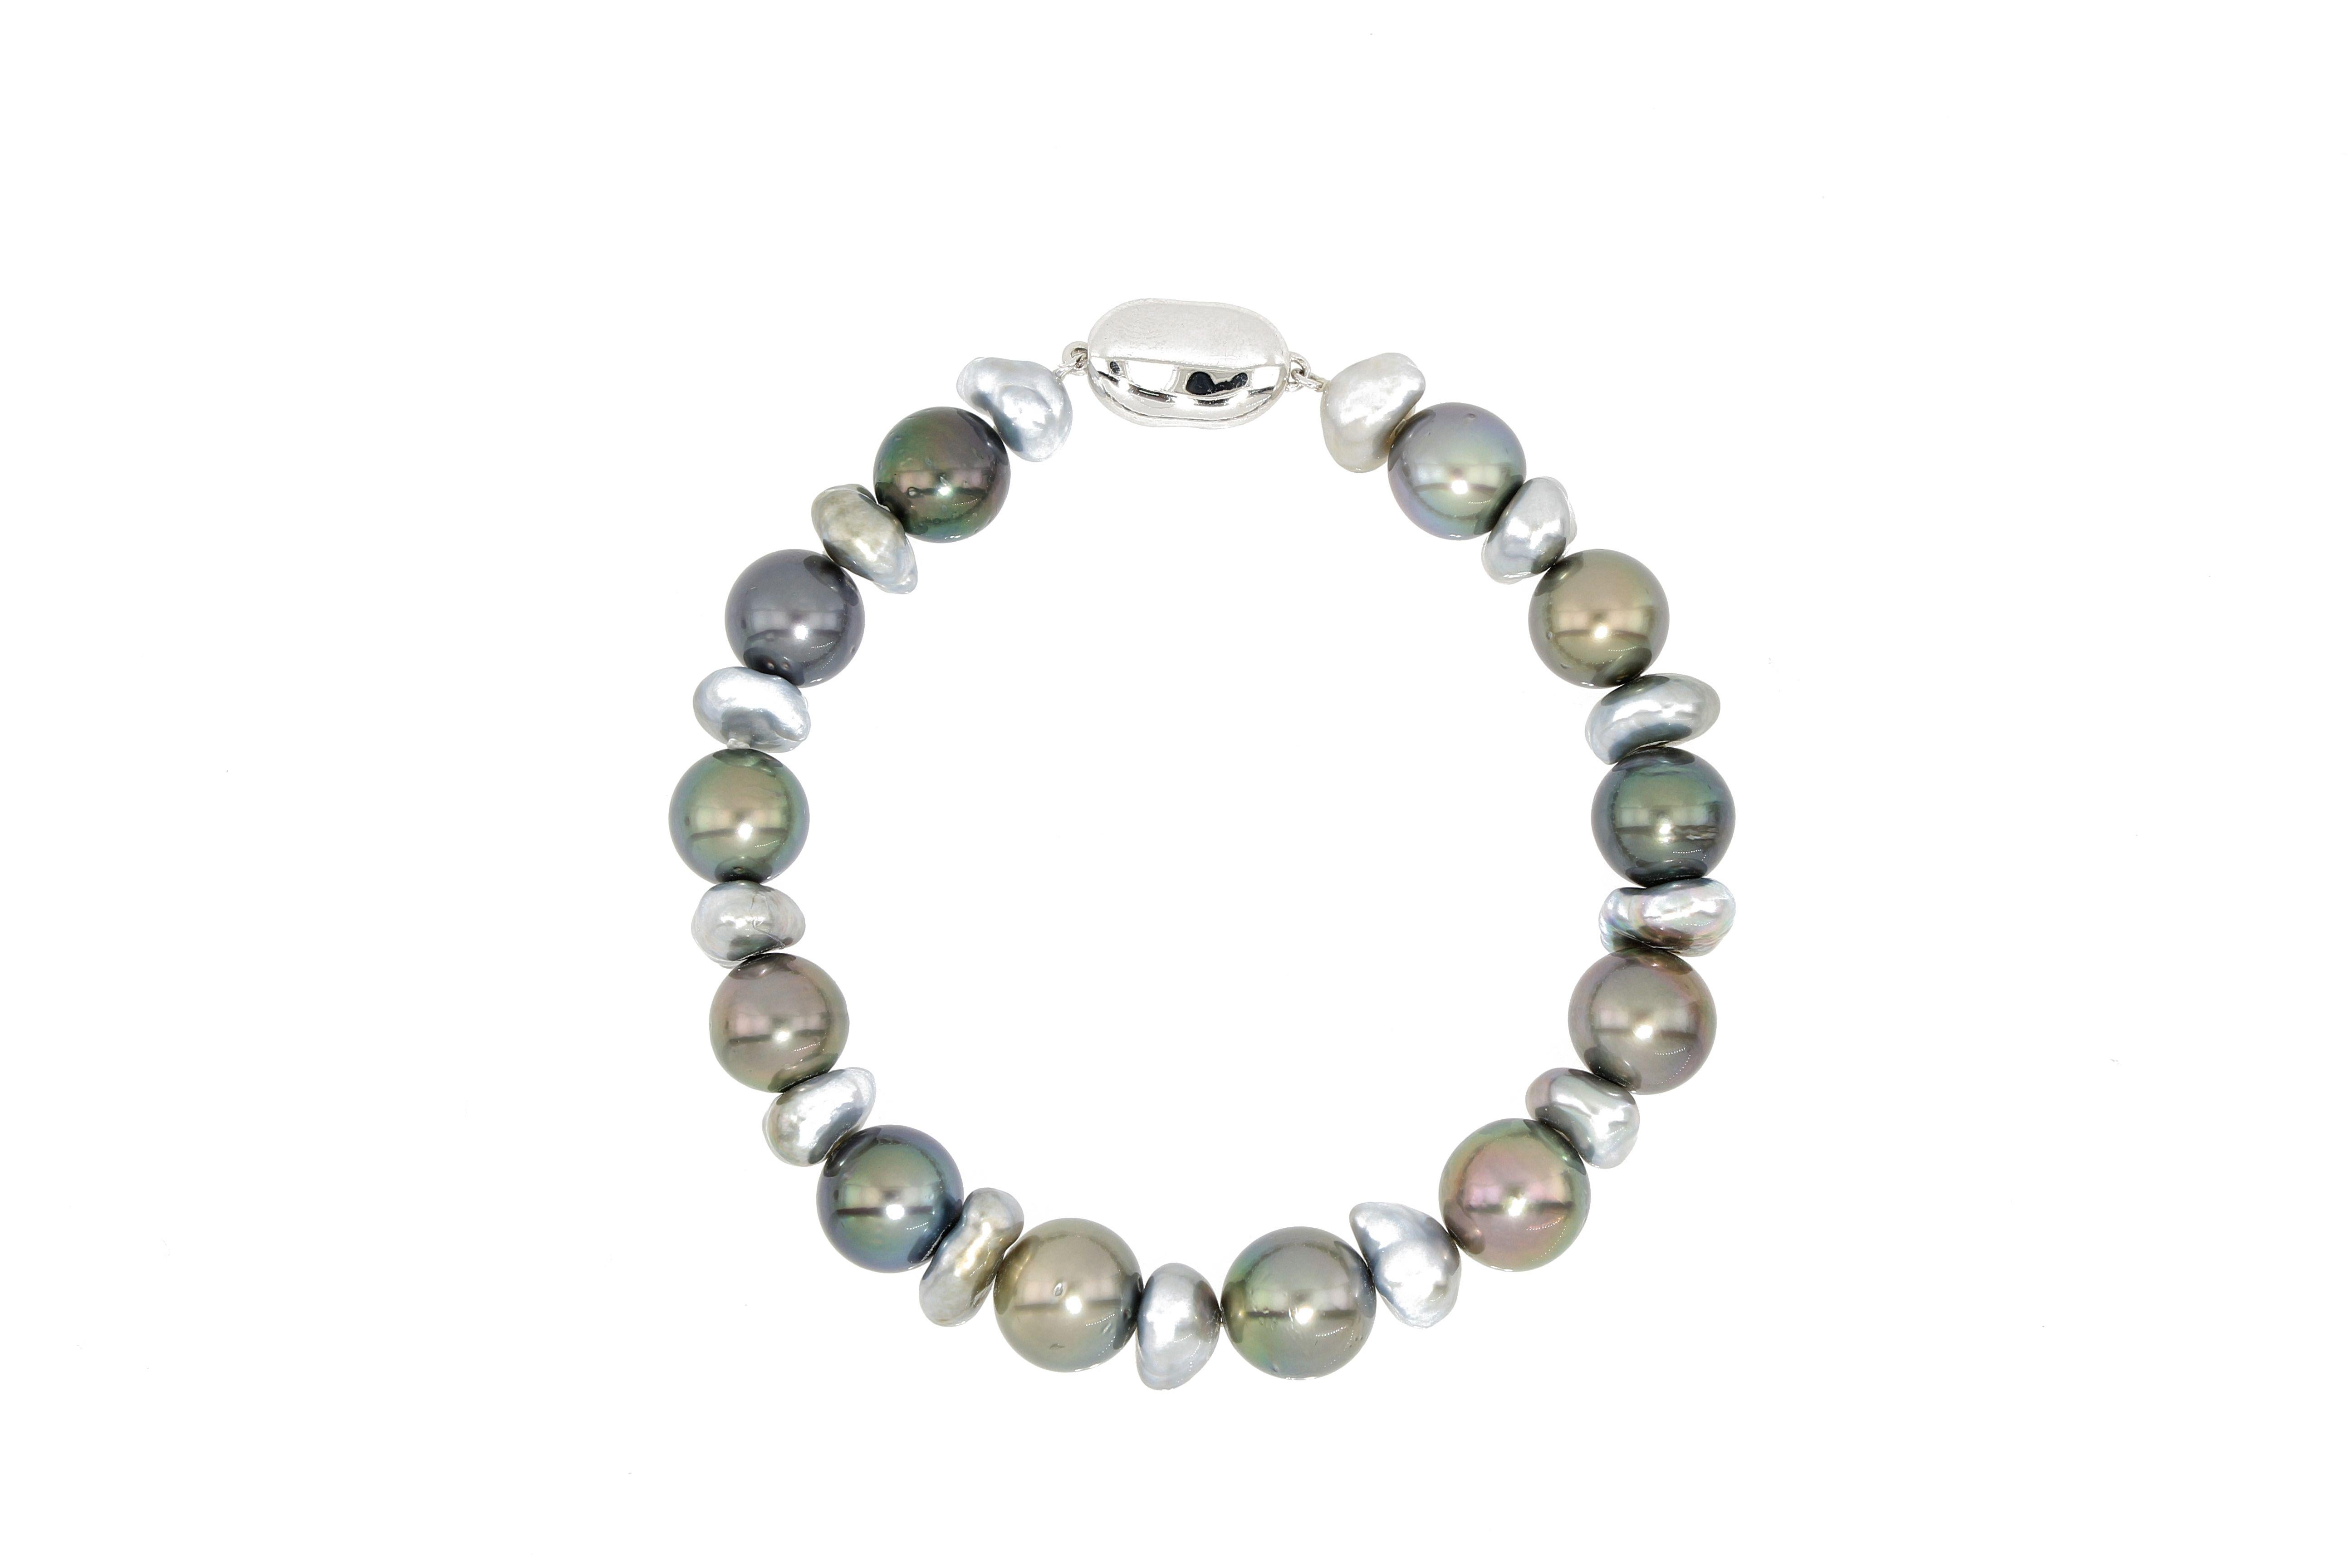 A very beautiful  pearl bracelet with 25 pieces of natural colour Tahitian pearls, from 8mm to 11mm in diameter, with 12 pieces being round, smooth and of very good luster, the other 13 pieces being irregular shaped keshi pearls in silvery grayish